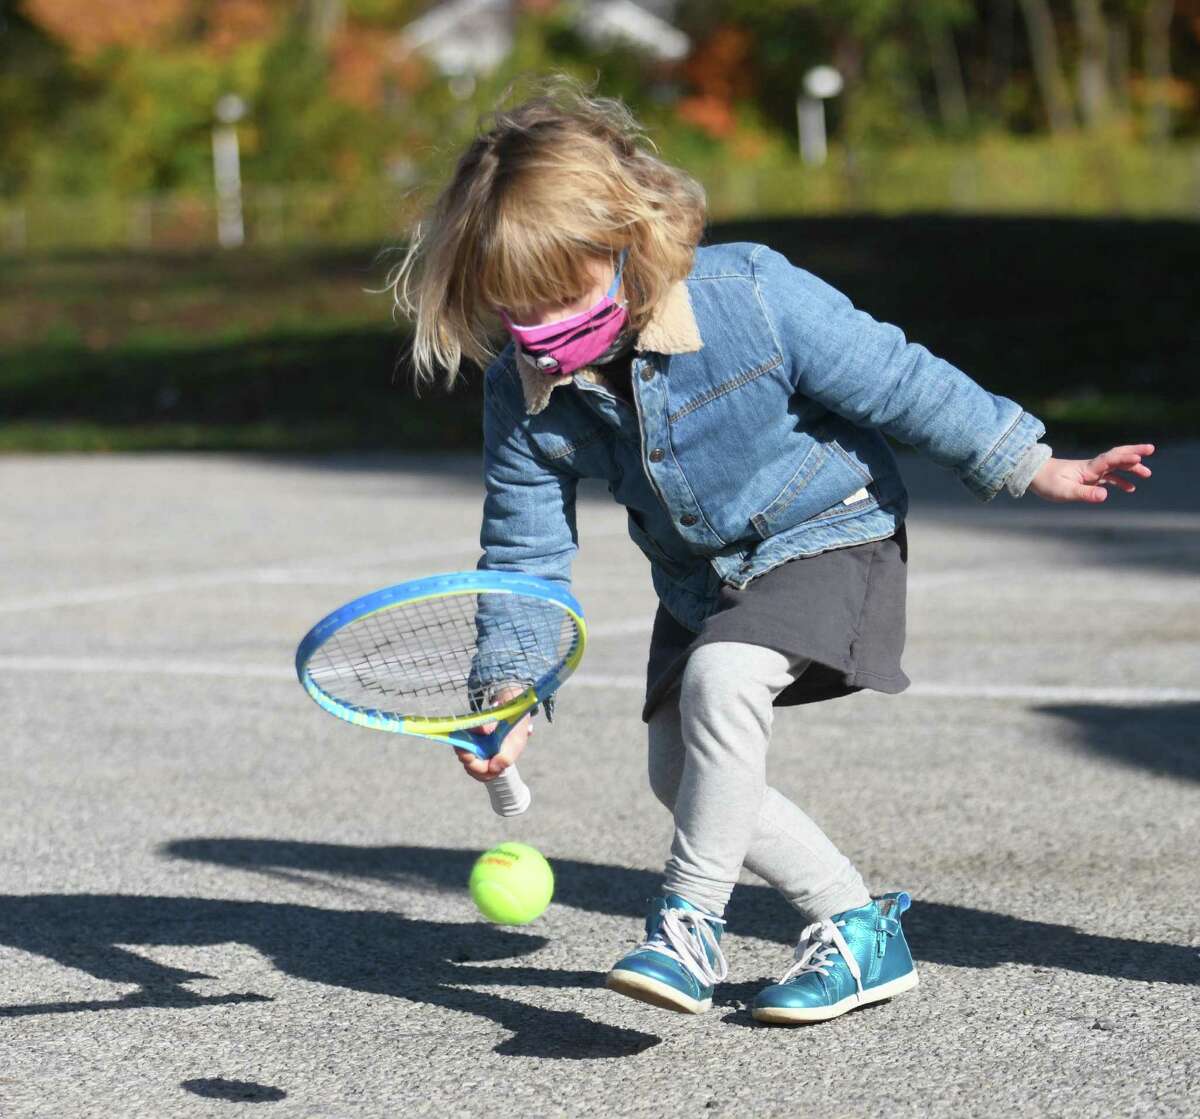 Kindergartner Lily Hagstrom practices bouncing the ball during former tennis pro Eric Butorac's class for students at Cos Cob School in the Cos Cob section of Greenwich, Conn. Thursday, Nov. 4, 2021. The former tennis doubles specialist lives in Cos Cob and his children attend school in Greenwich, so he took a day to teach tennis to kids during gym class at Cos Cob School. The students learned the basics of tennis and completed drills individually and in small groups.